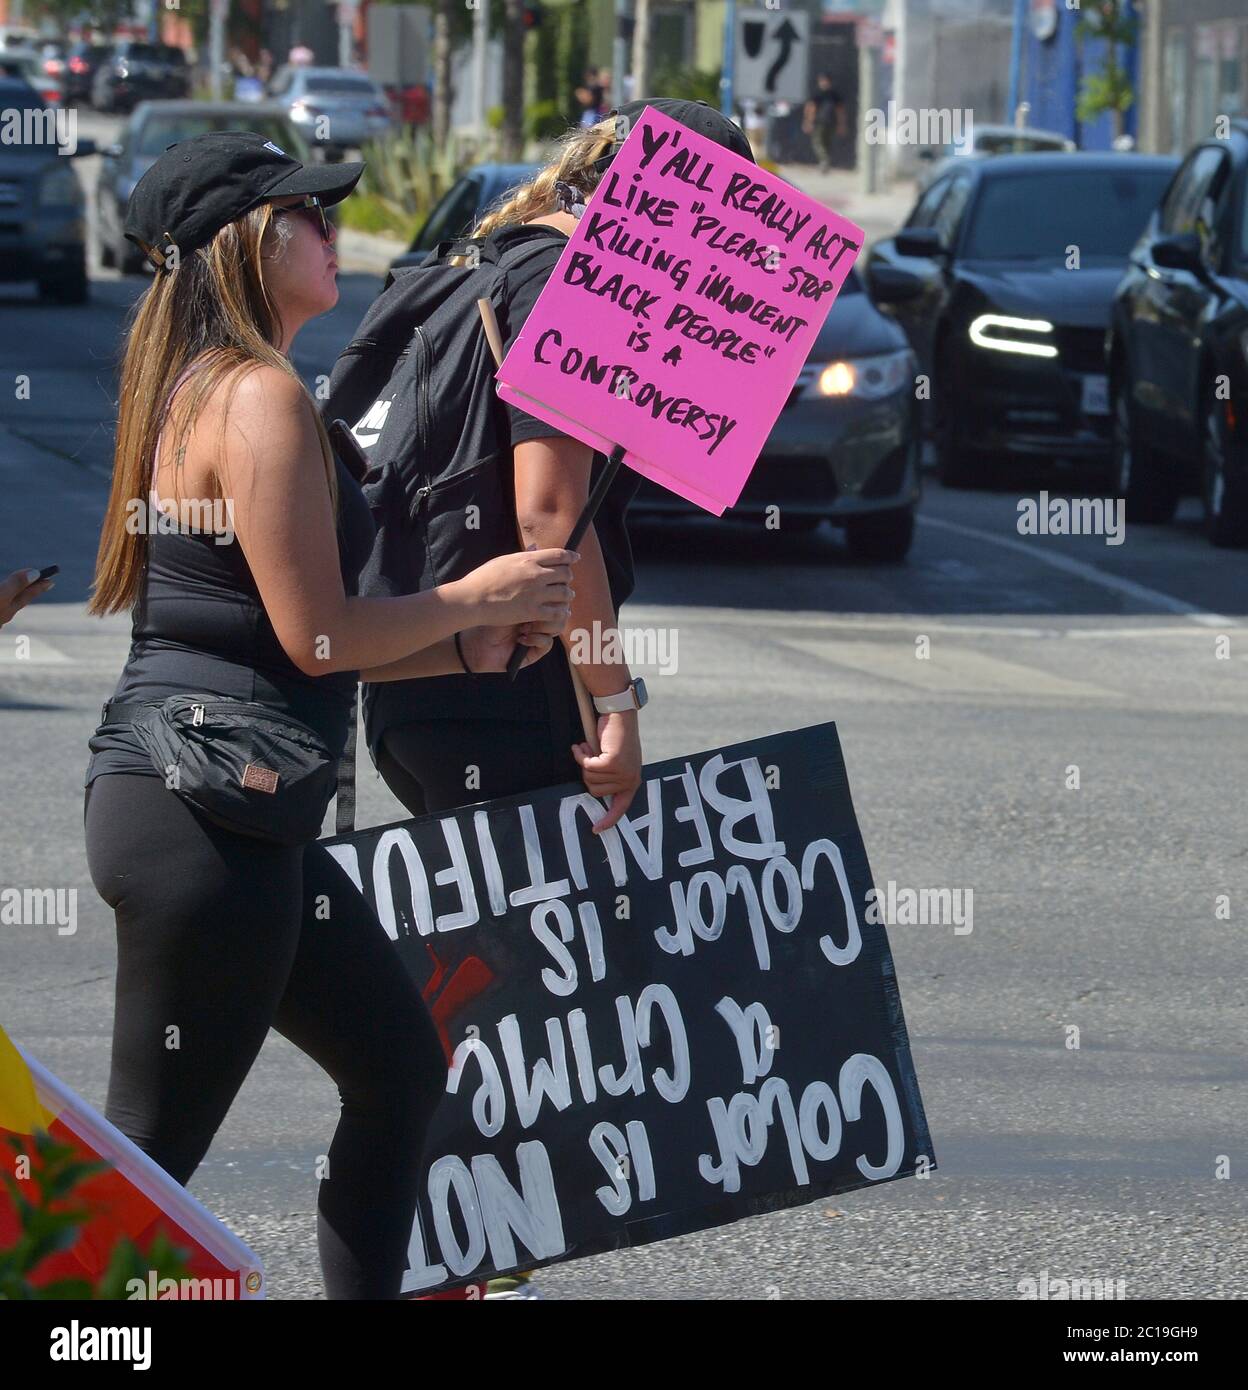 Los Angeles, United States. 15th June, 2020. 'All Black Lives Matter' demonstrators walk along Santa Monica Blvd. after marching to West Hollywood marching from Hollywood denouncing racial injustice and supporting LGBTQ rights, as protests continued nationwide on Sunday, June 14, 2020. An estimated 20,000 people turned out Sunday, Flag Day, for an anti-racism solidarity march from Hollywood to West Hollywood, the city originally set to host the LA Pride Parade before it was canceled due to the coronavirus. Photo by Jim Ruymen/UPI Credit: UPI/Alamy Live News Stock Photo